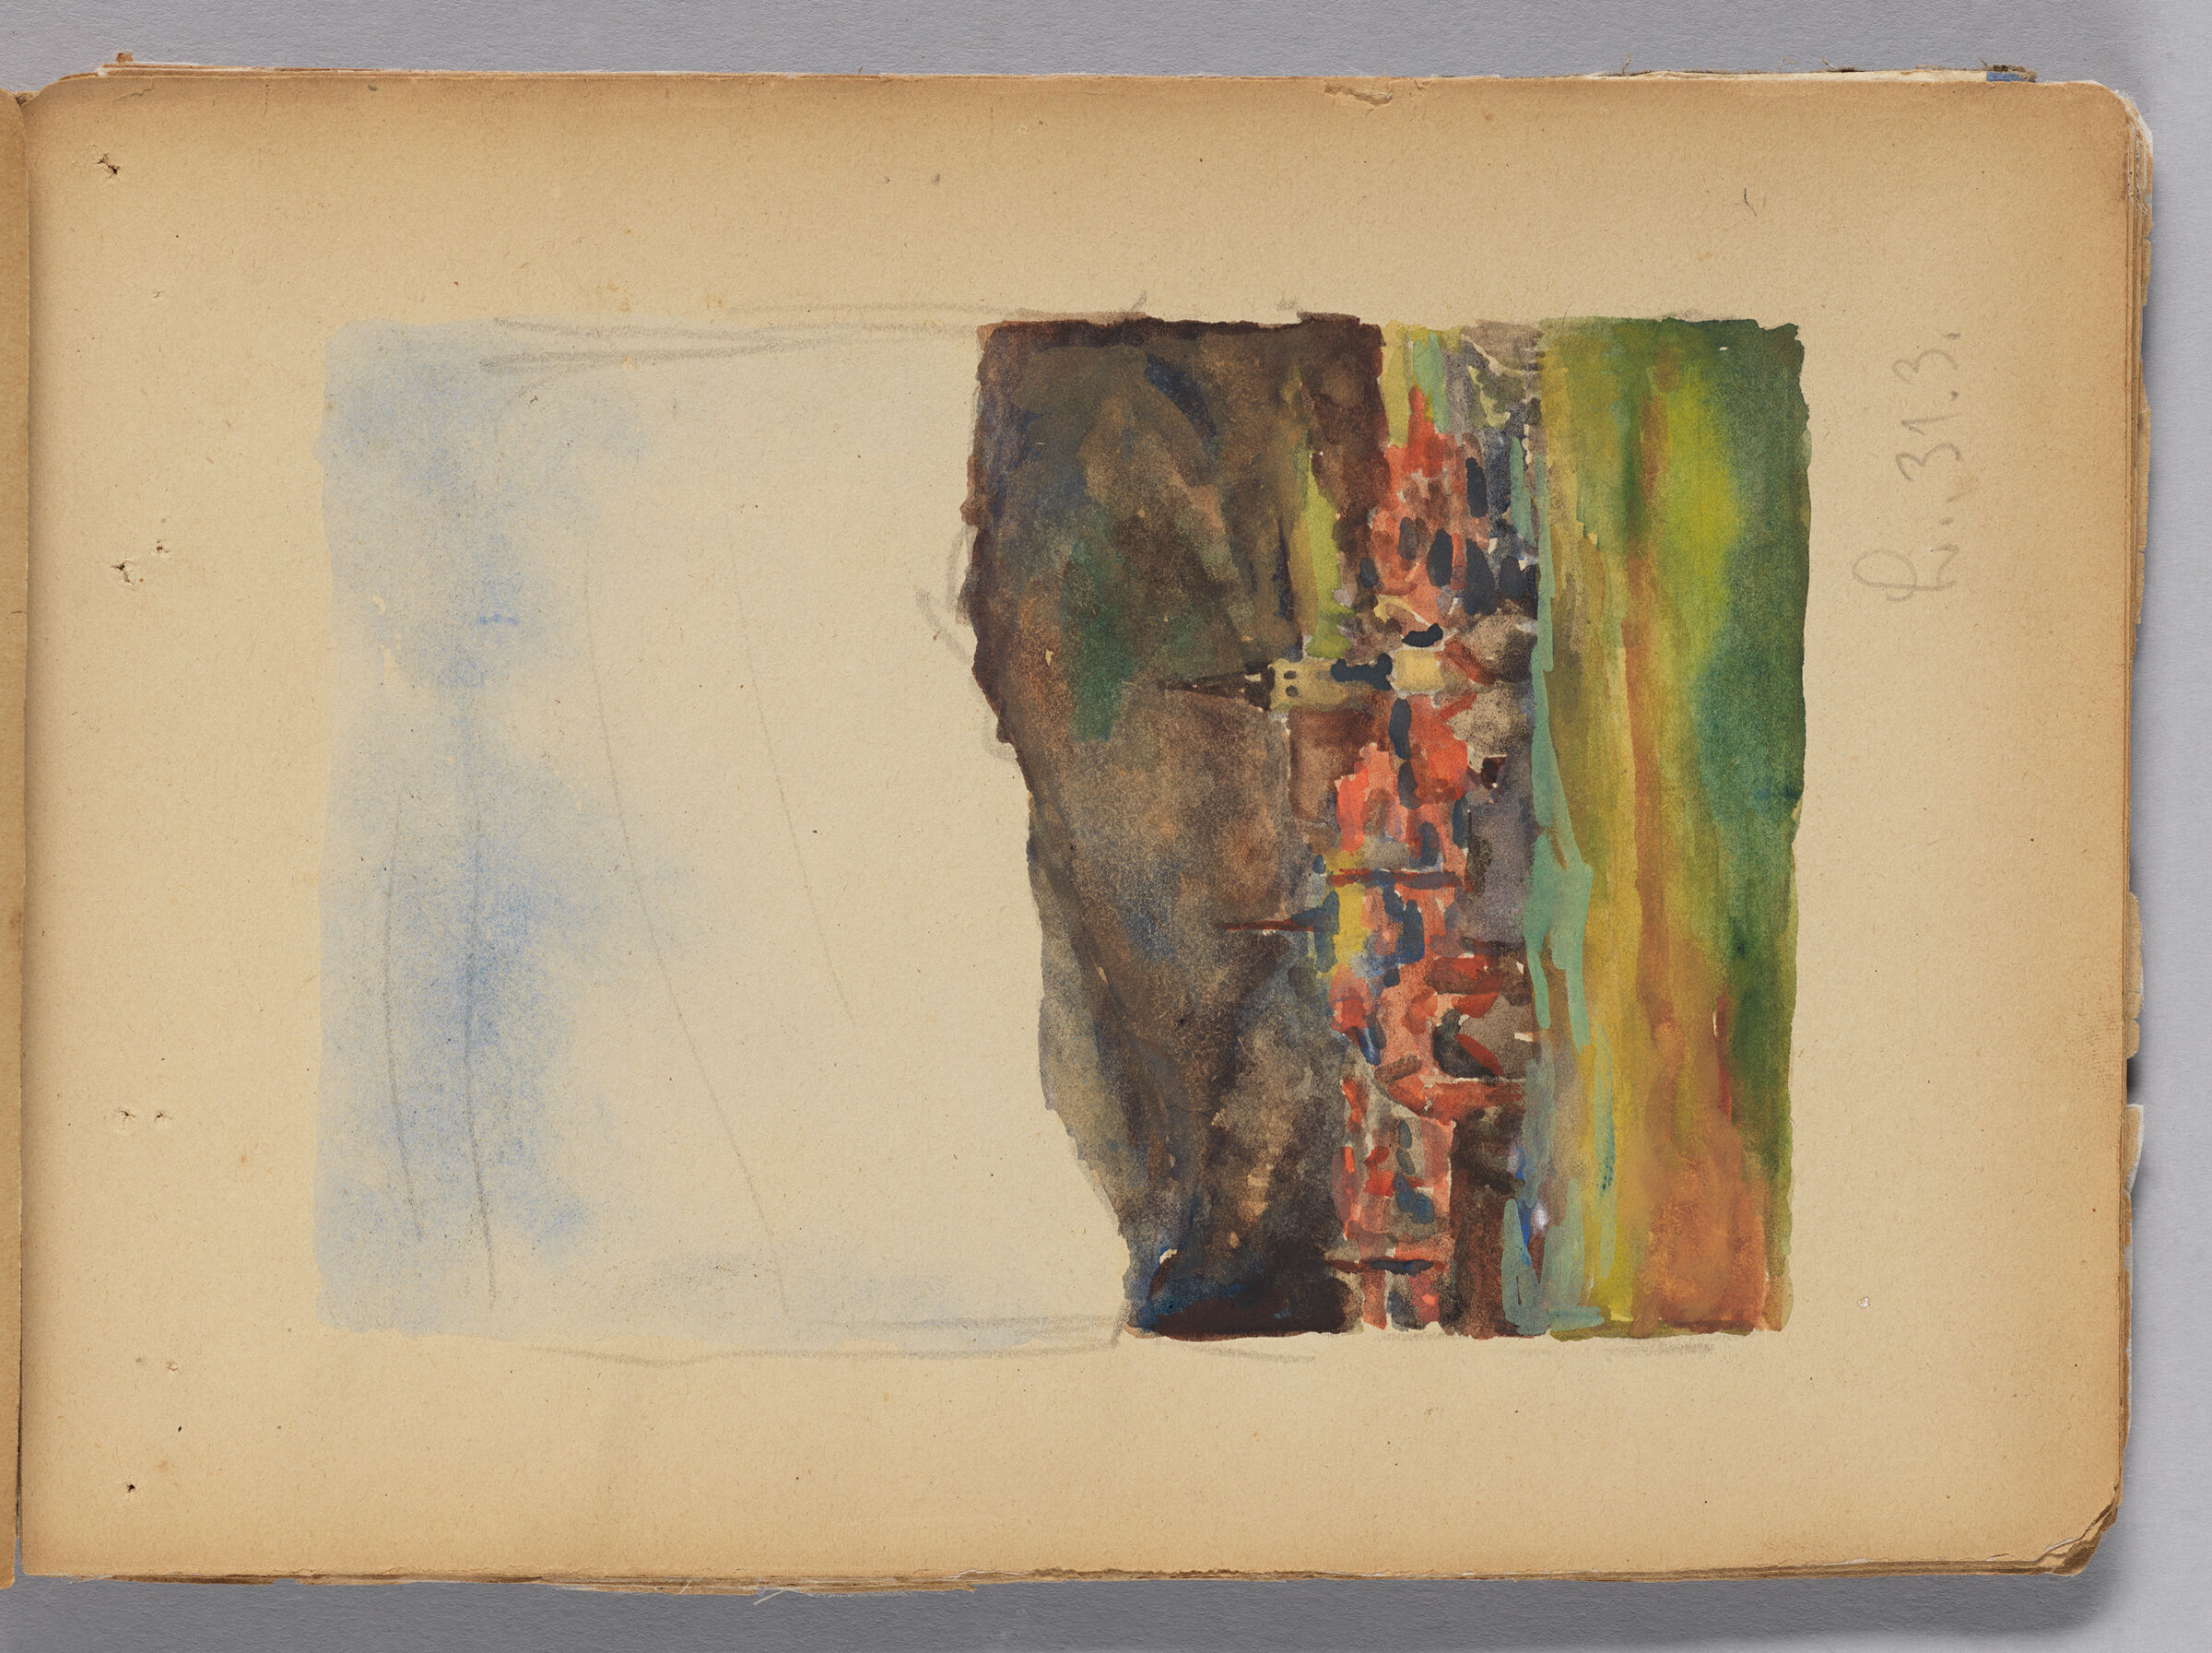 Untitled (Blank With Stray Marks, Left Page); Untitled (Landscape With Village, Right Page)